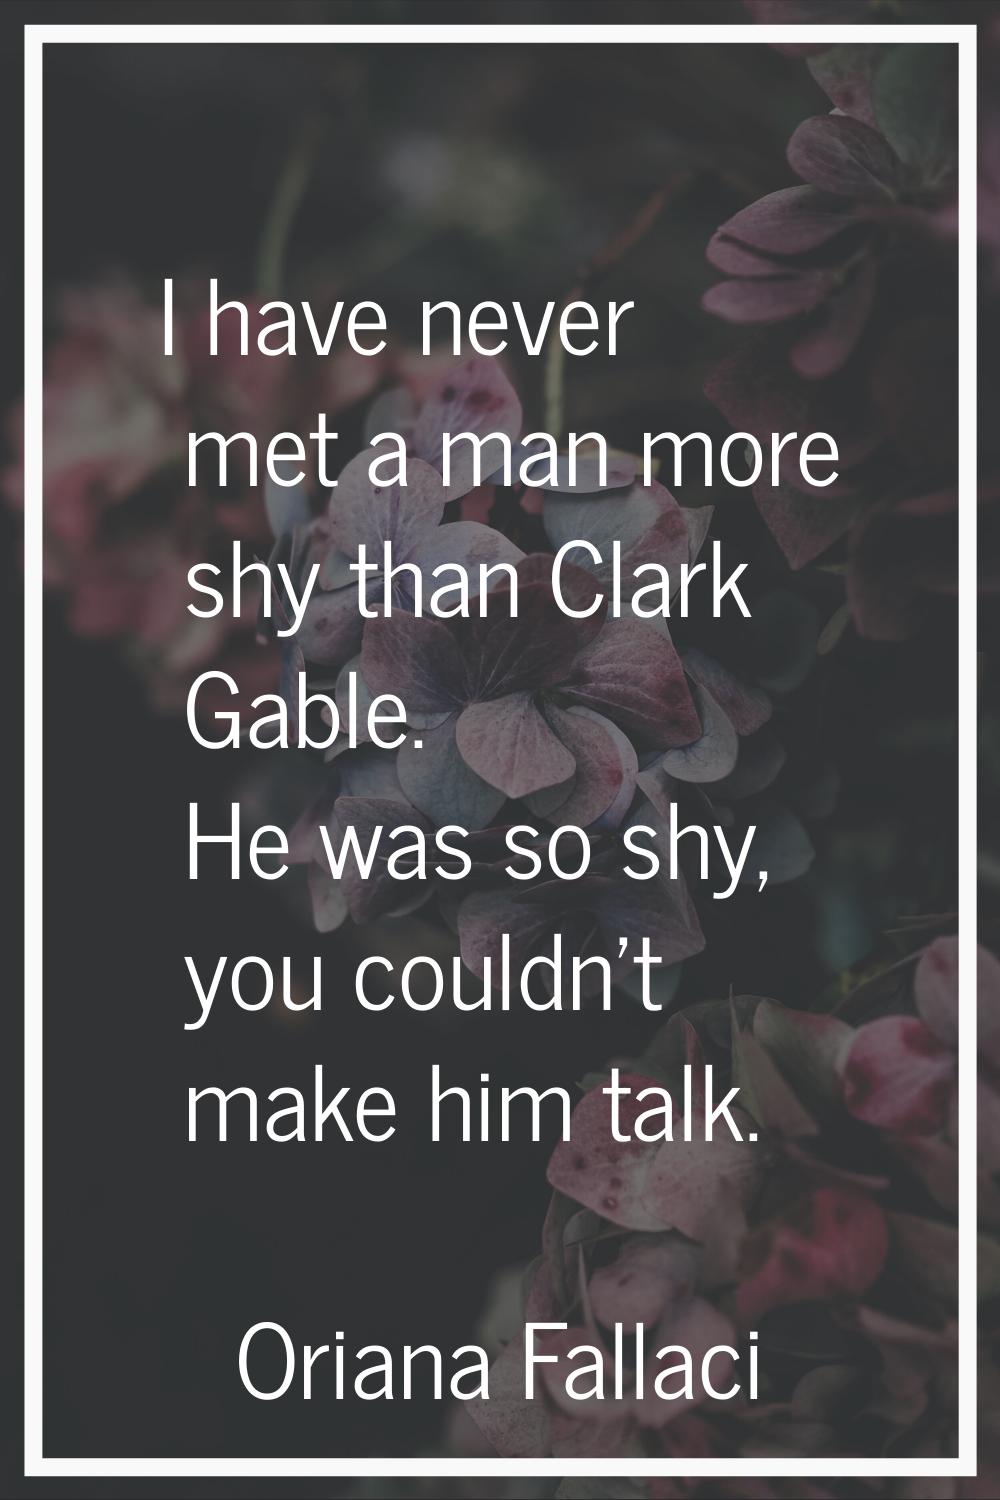 I have never met a man more shy than Clark Gable. He was so shy, you couldn't make him talk.